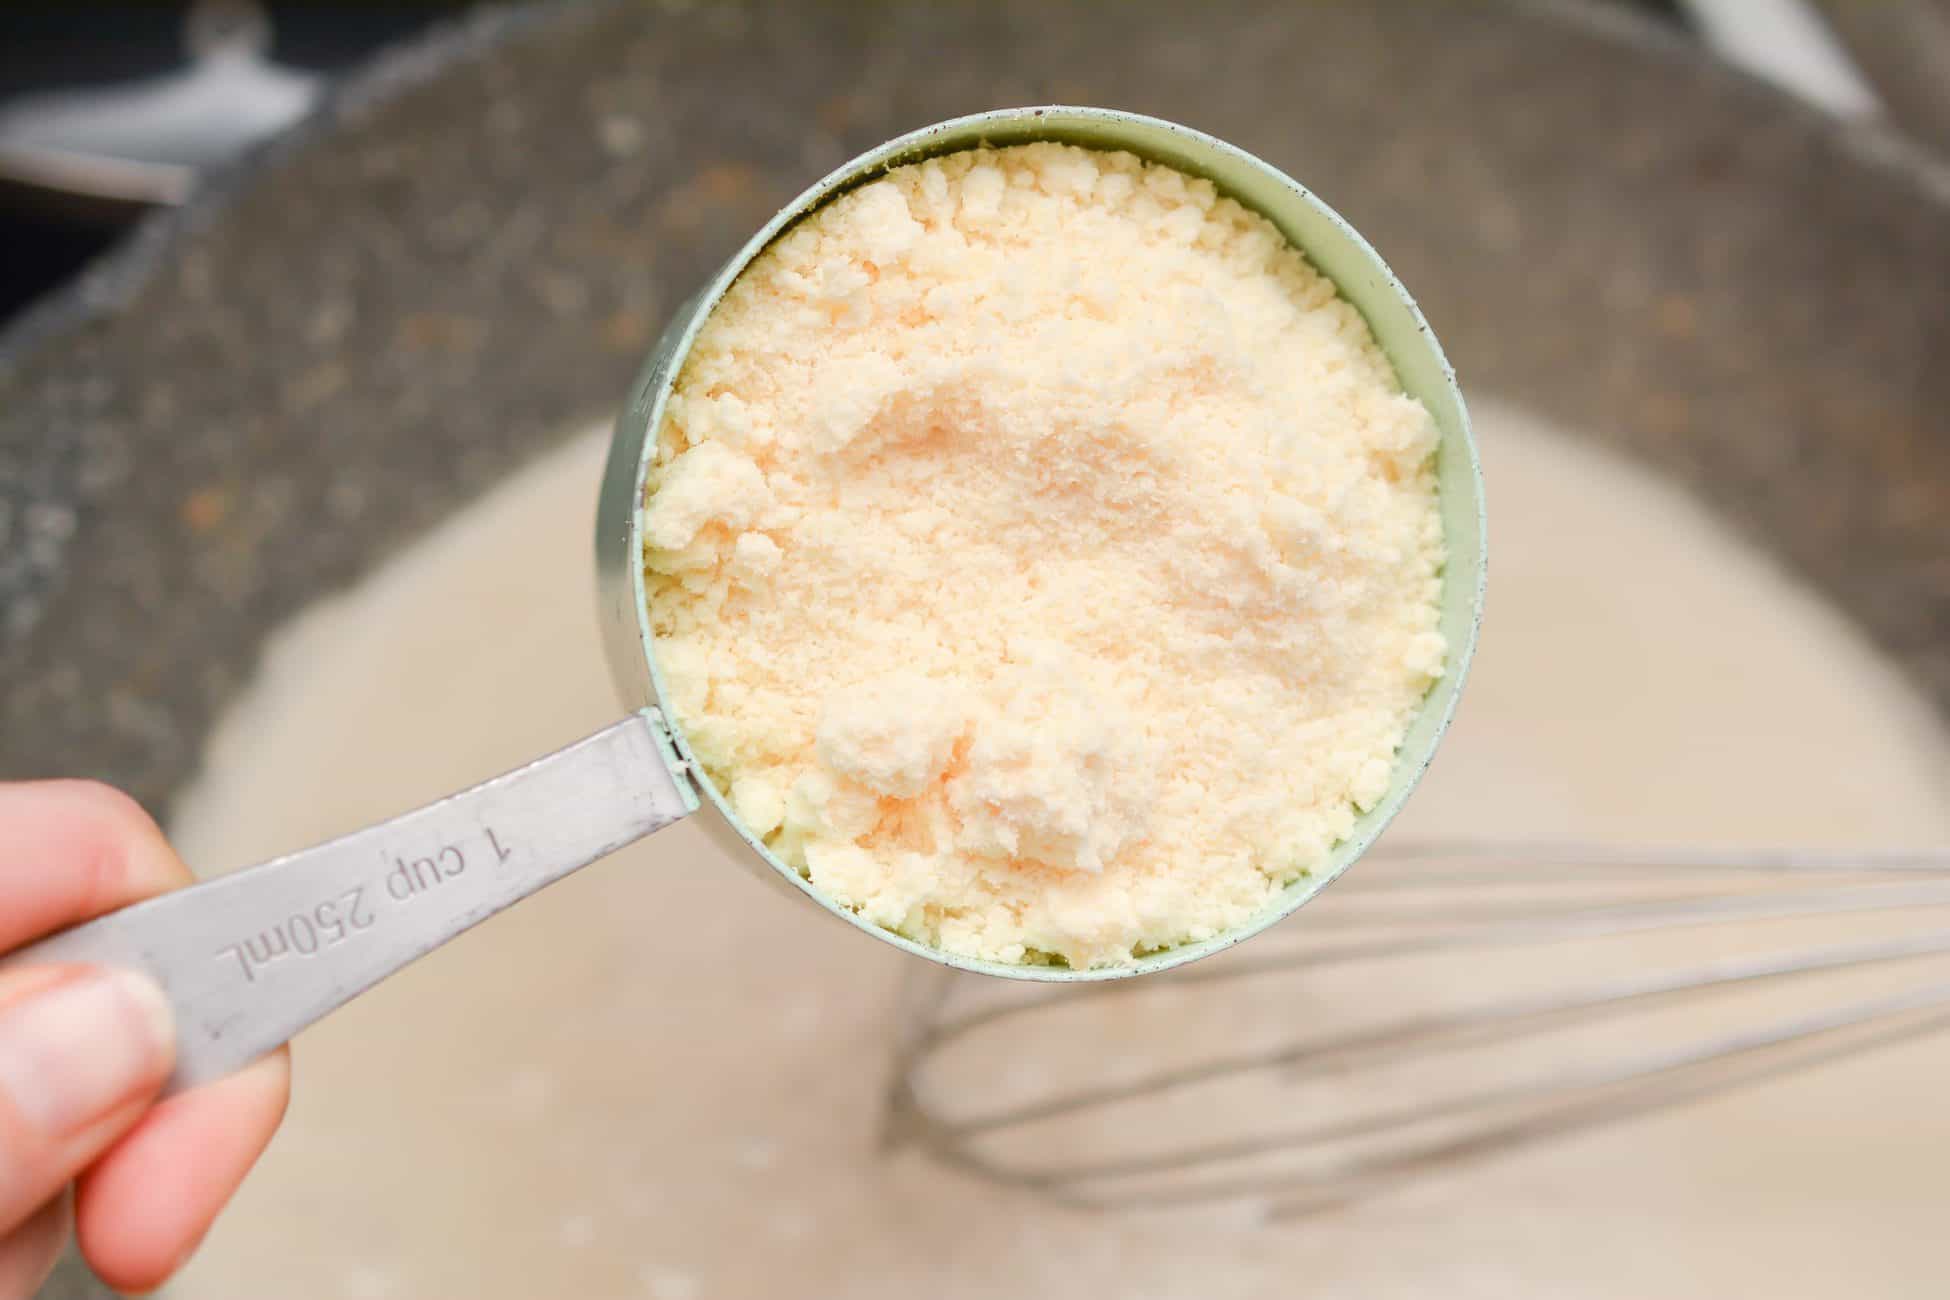 Stir in the Parmesan cheese until melted.